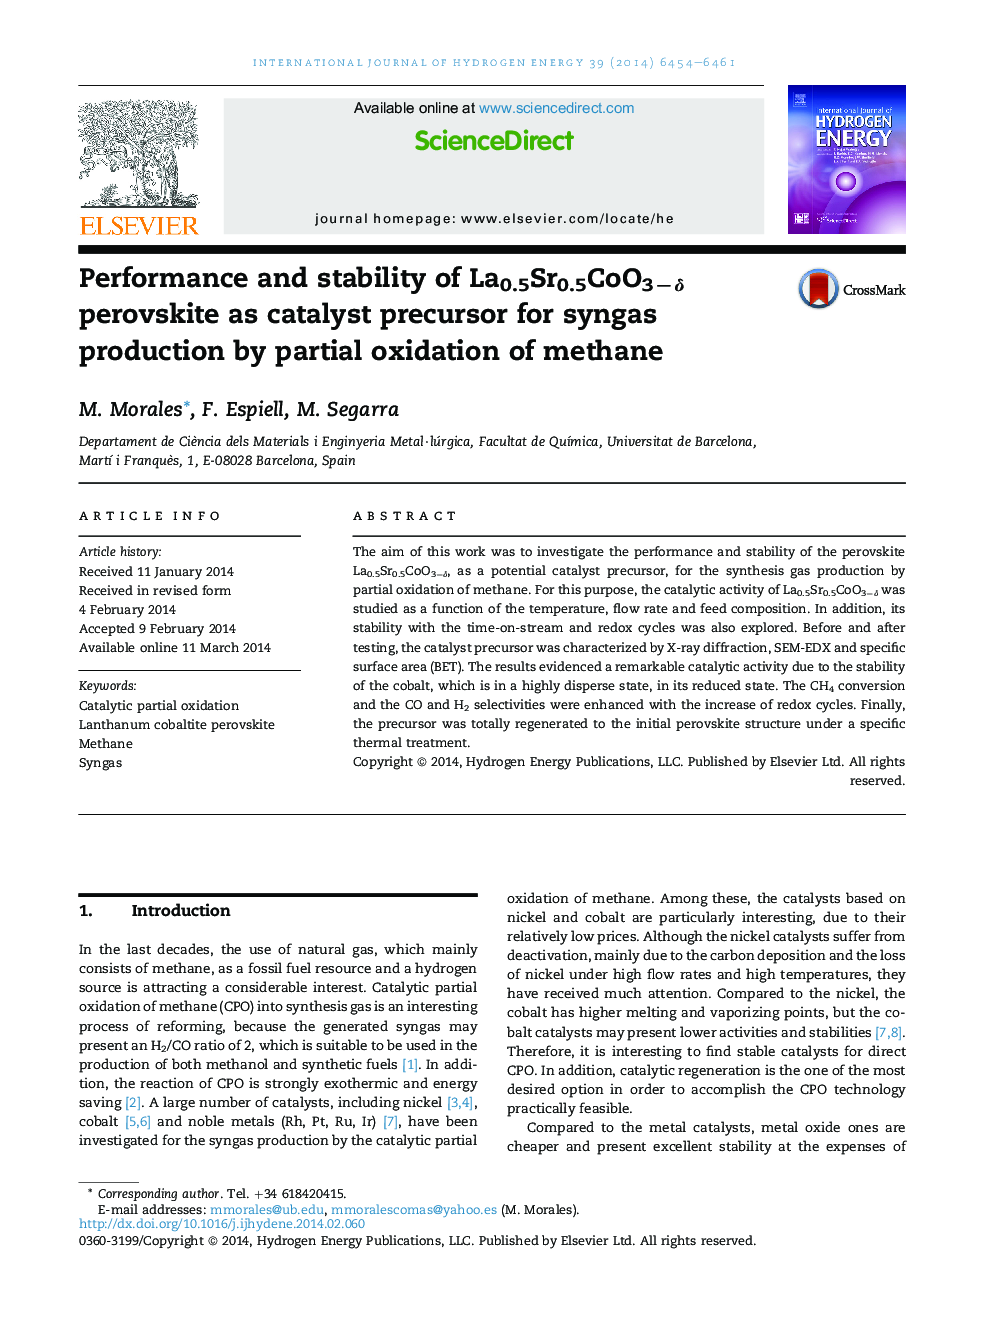 Performance and stability of La0.5Sr0.5CoO3−δ perovskite as catalyst precursor for syngas production by partial oxidation of methane